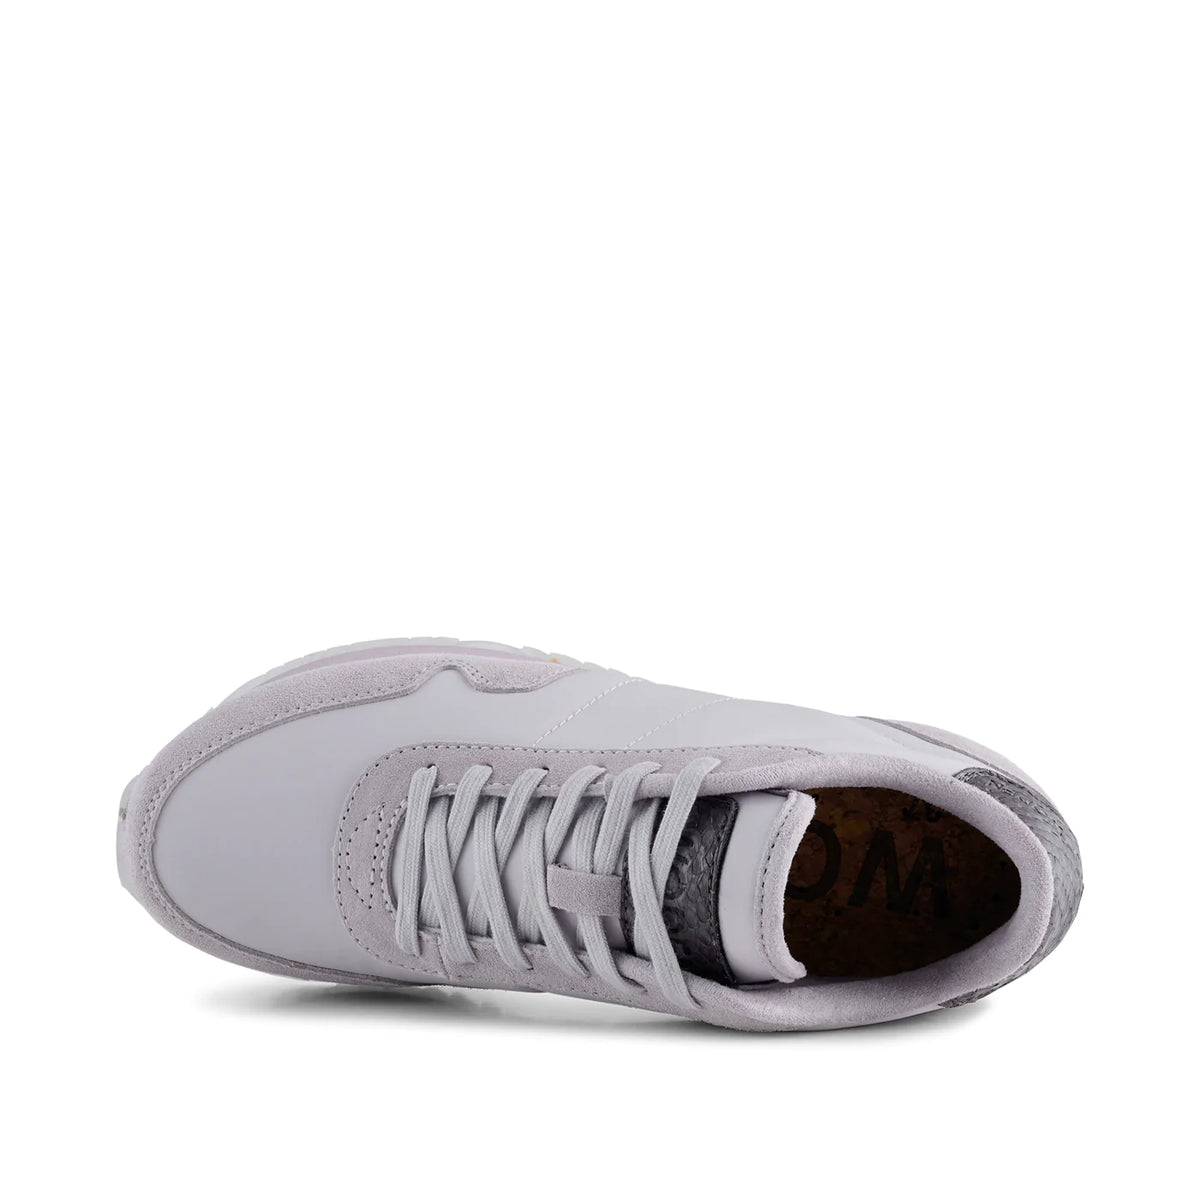 Woden Sneaker Nora III Leather Lilac Marble